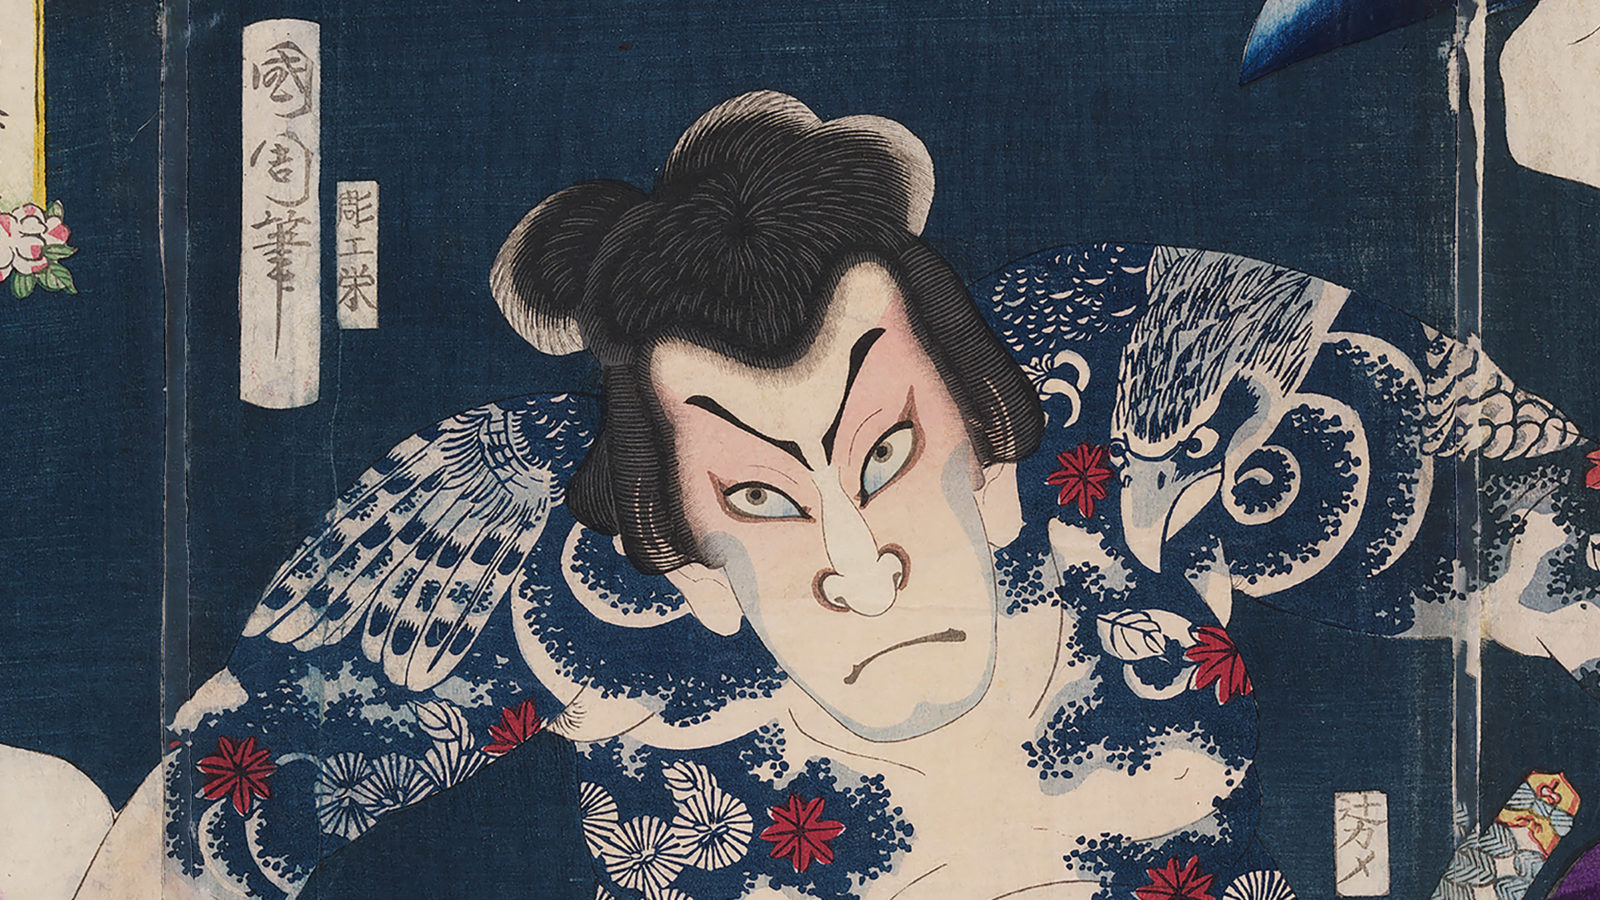 Explore the Rich History of Japanese Tattoos